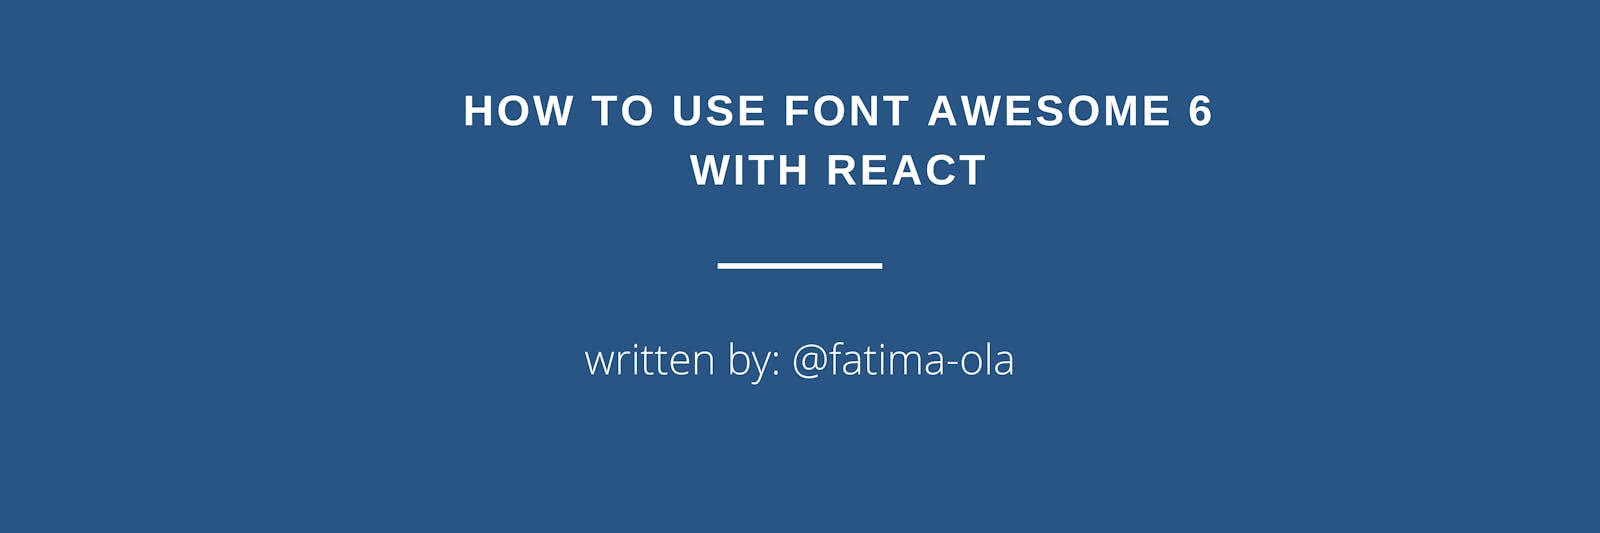 How To Use Font Awesome 6 with React